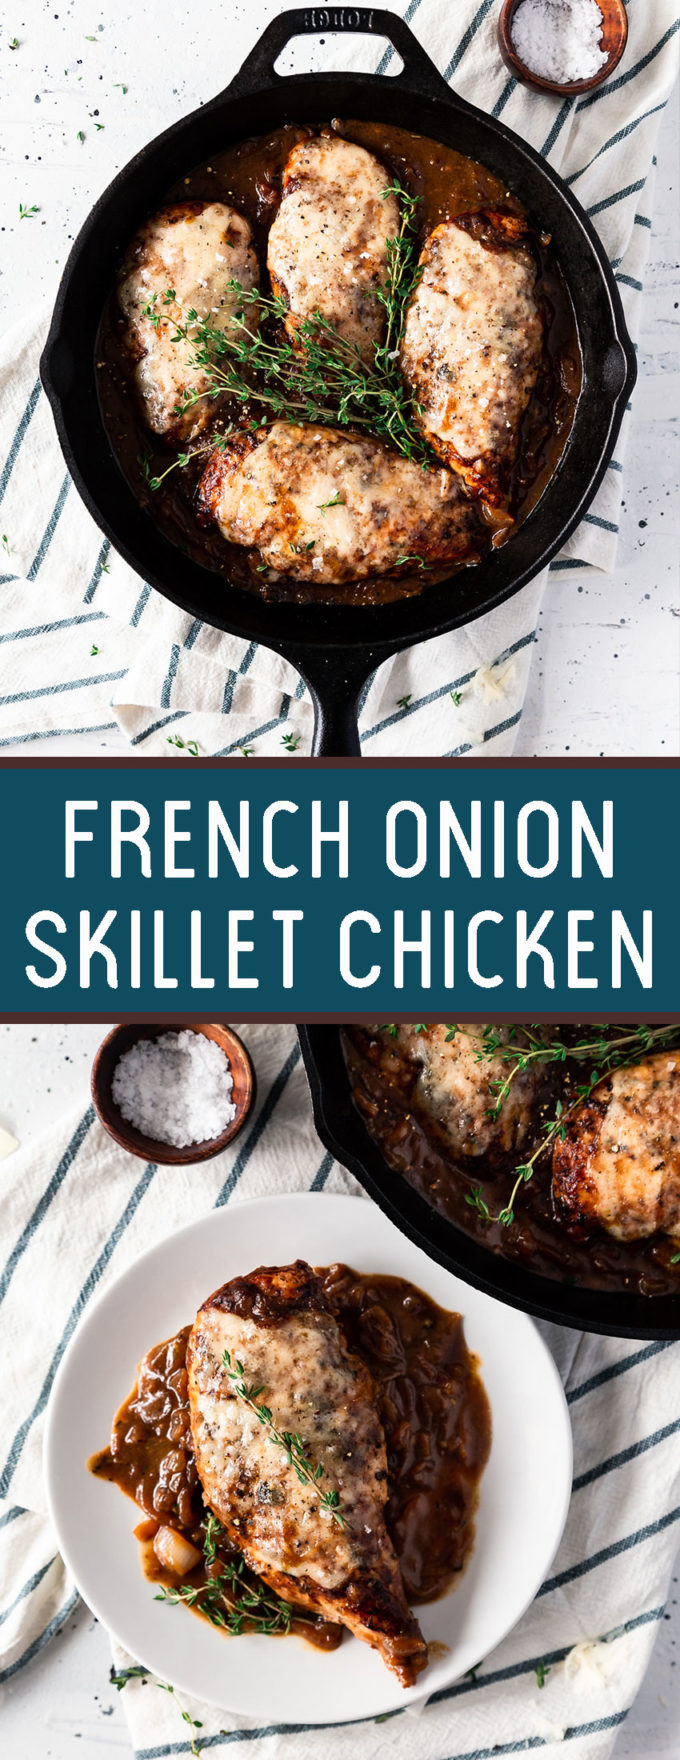 Delicious and easy to make French onion skillet chicken